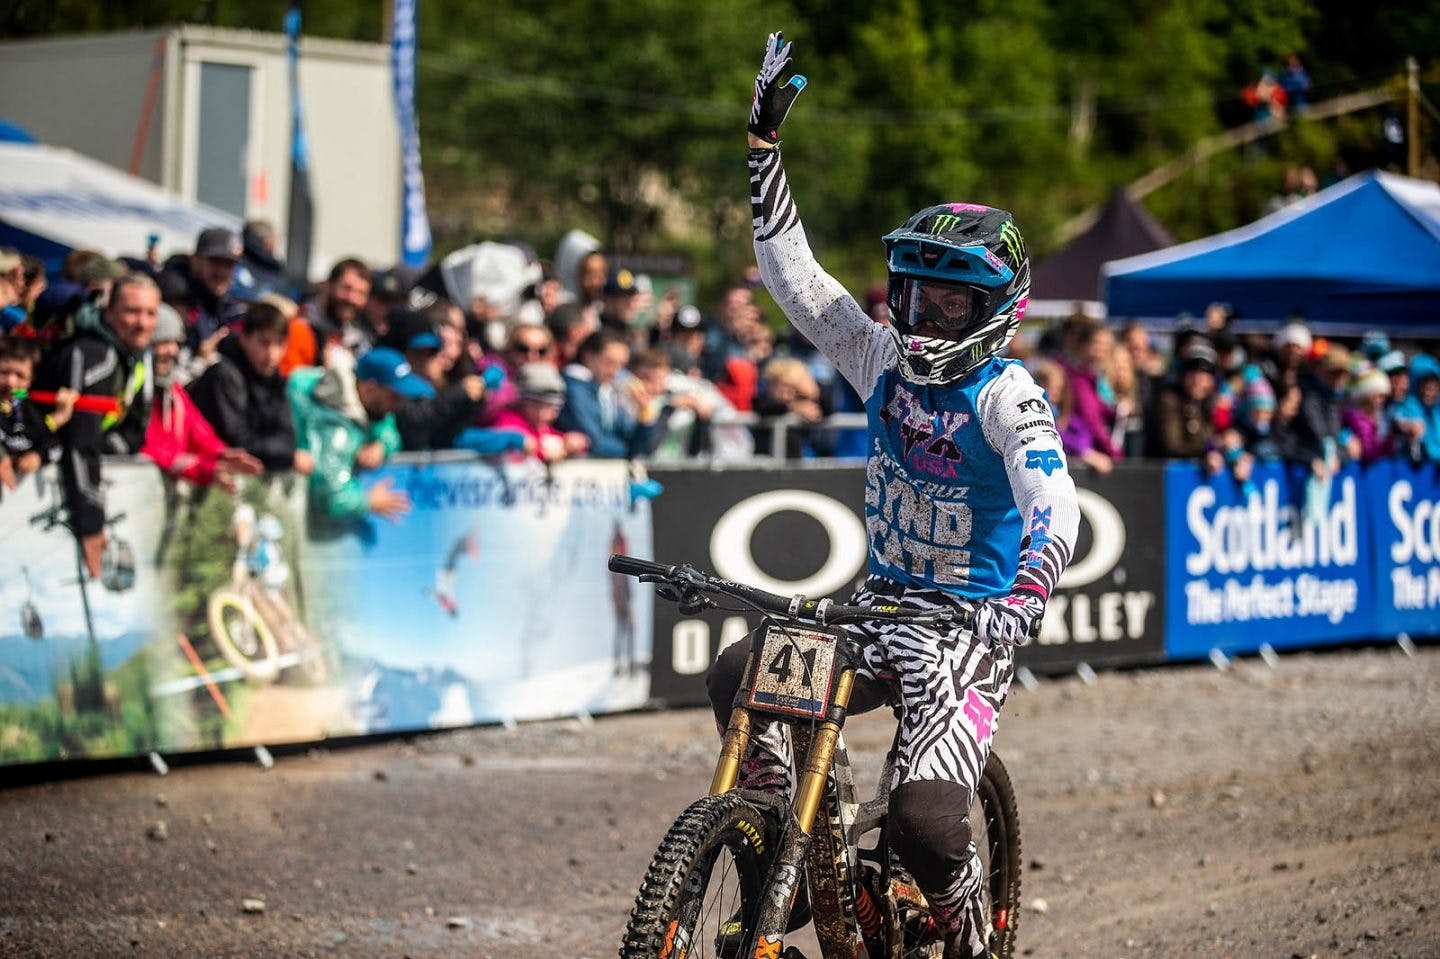 Fort William - Celebrating at the finish line